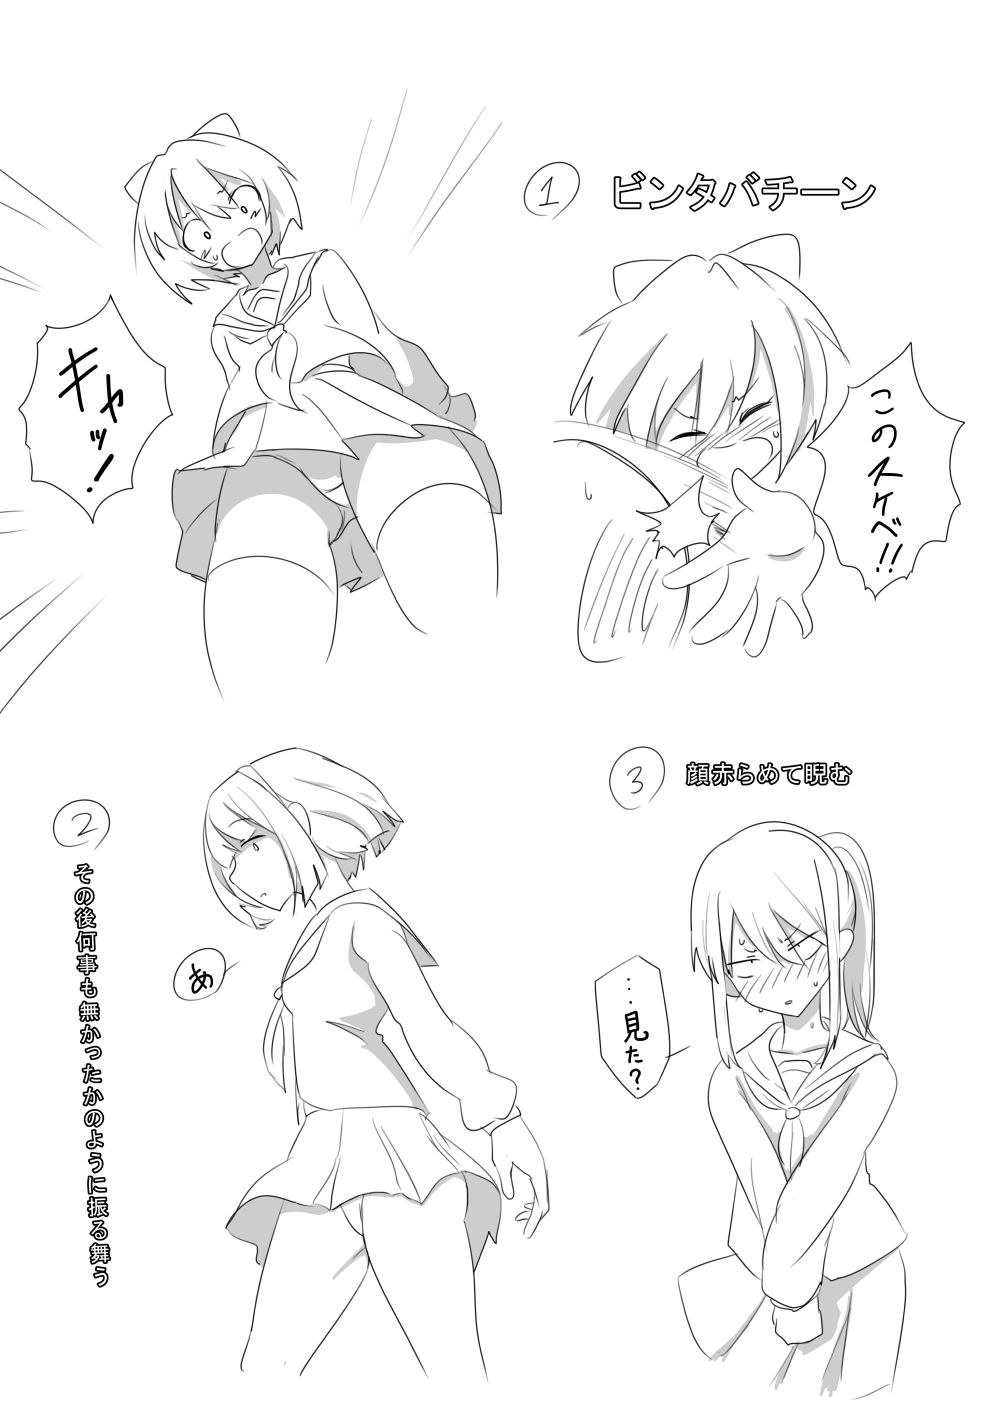 Image: Which is the heroine's correct reaction when she sees her pants? 1